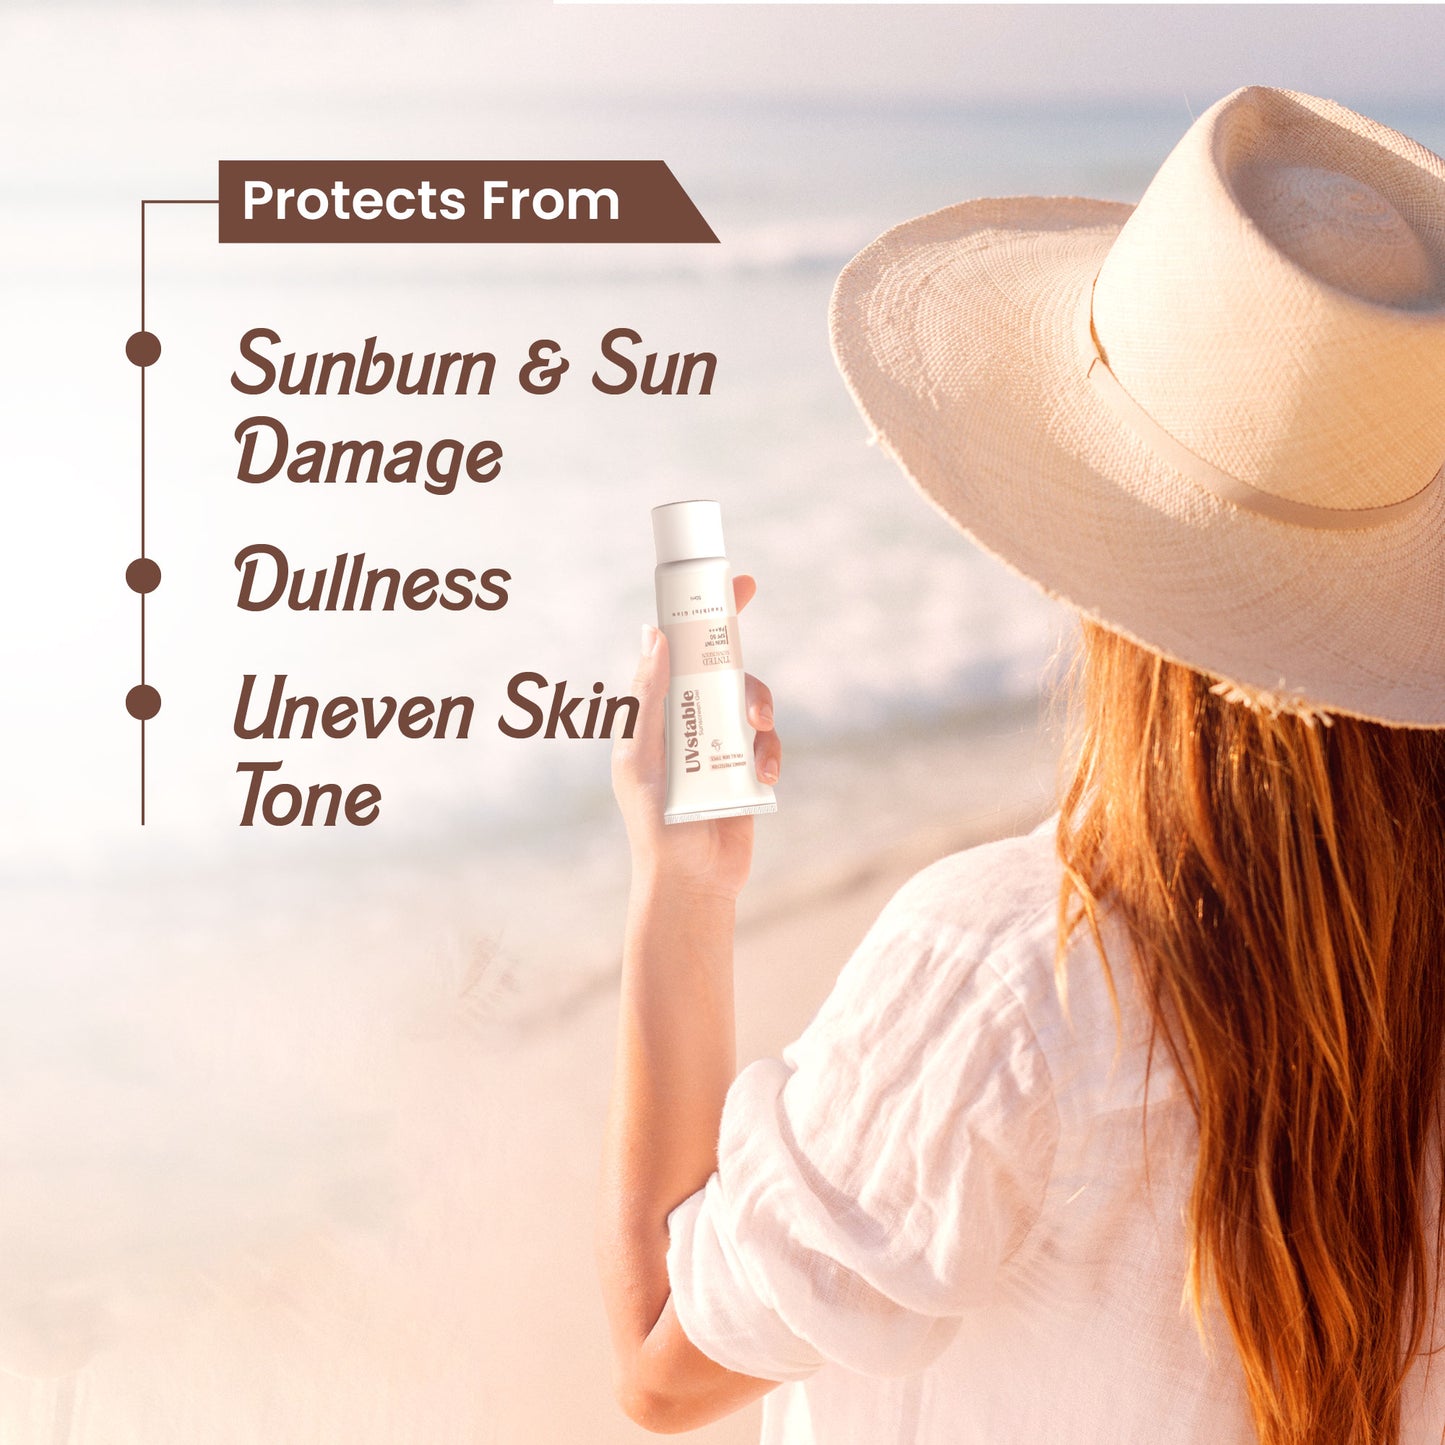 UVstable Skin Tint Sunscreen | SPF 50 |PA+++ , 50ml, for Sun Protection with Natural Matte Finish, Dermatologically Tested, Non- Sticky Formula, For All Skin Types